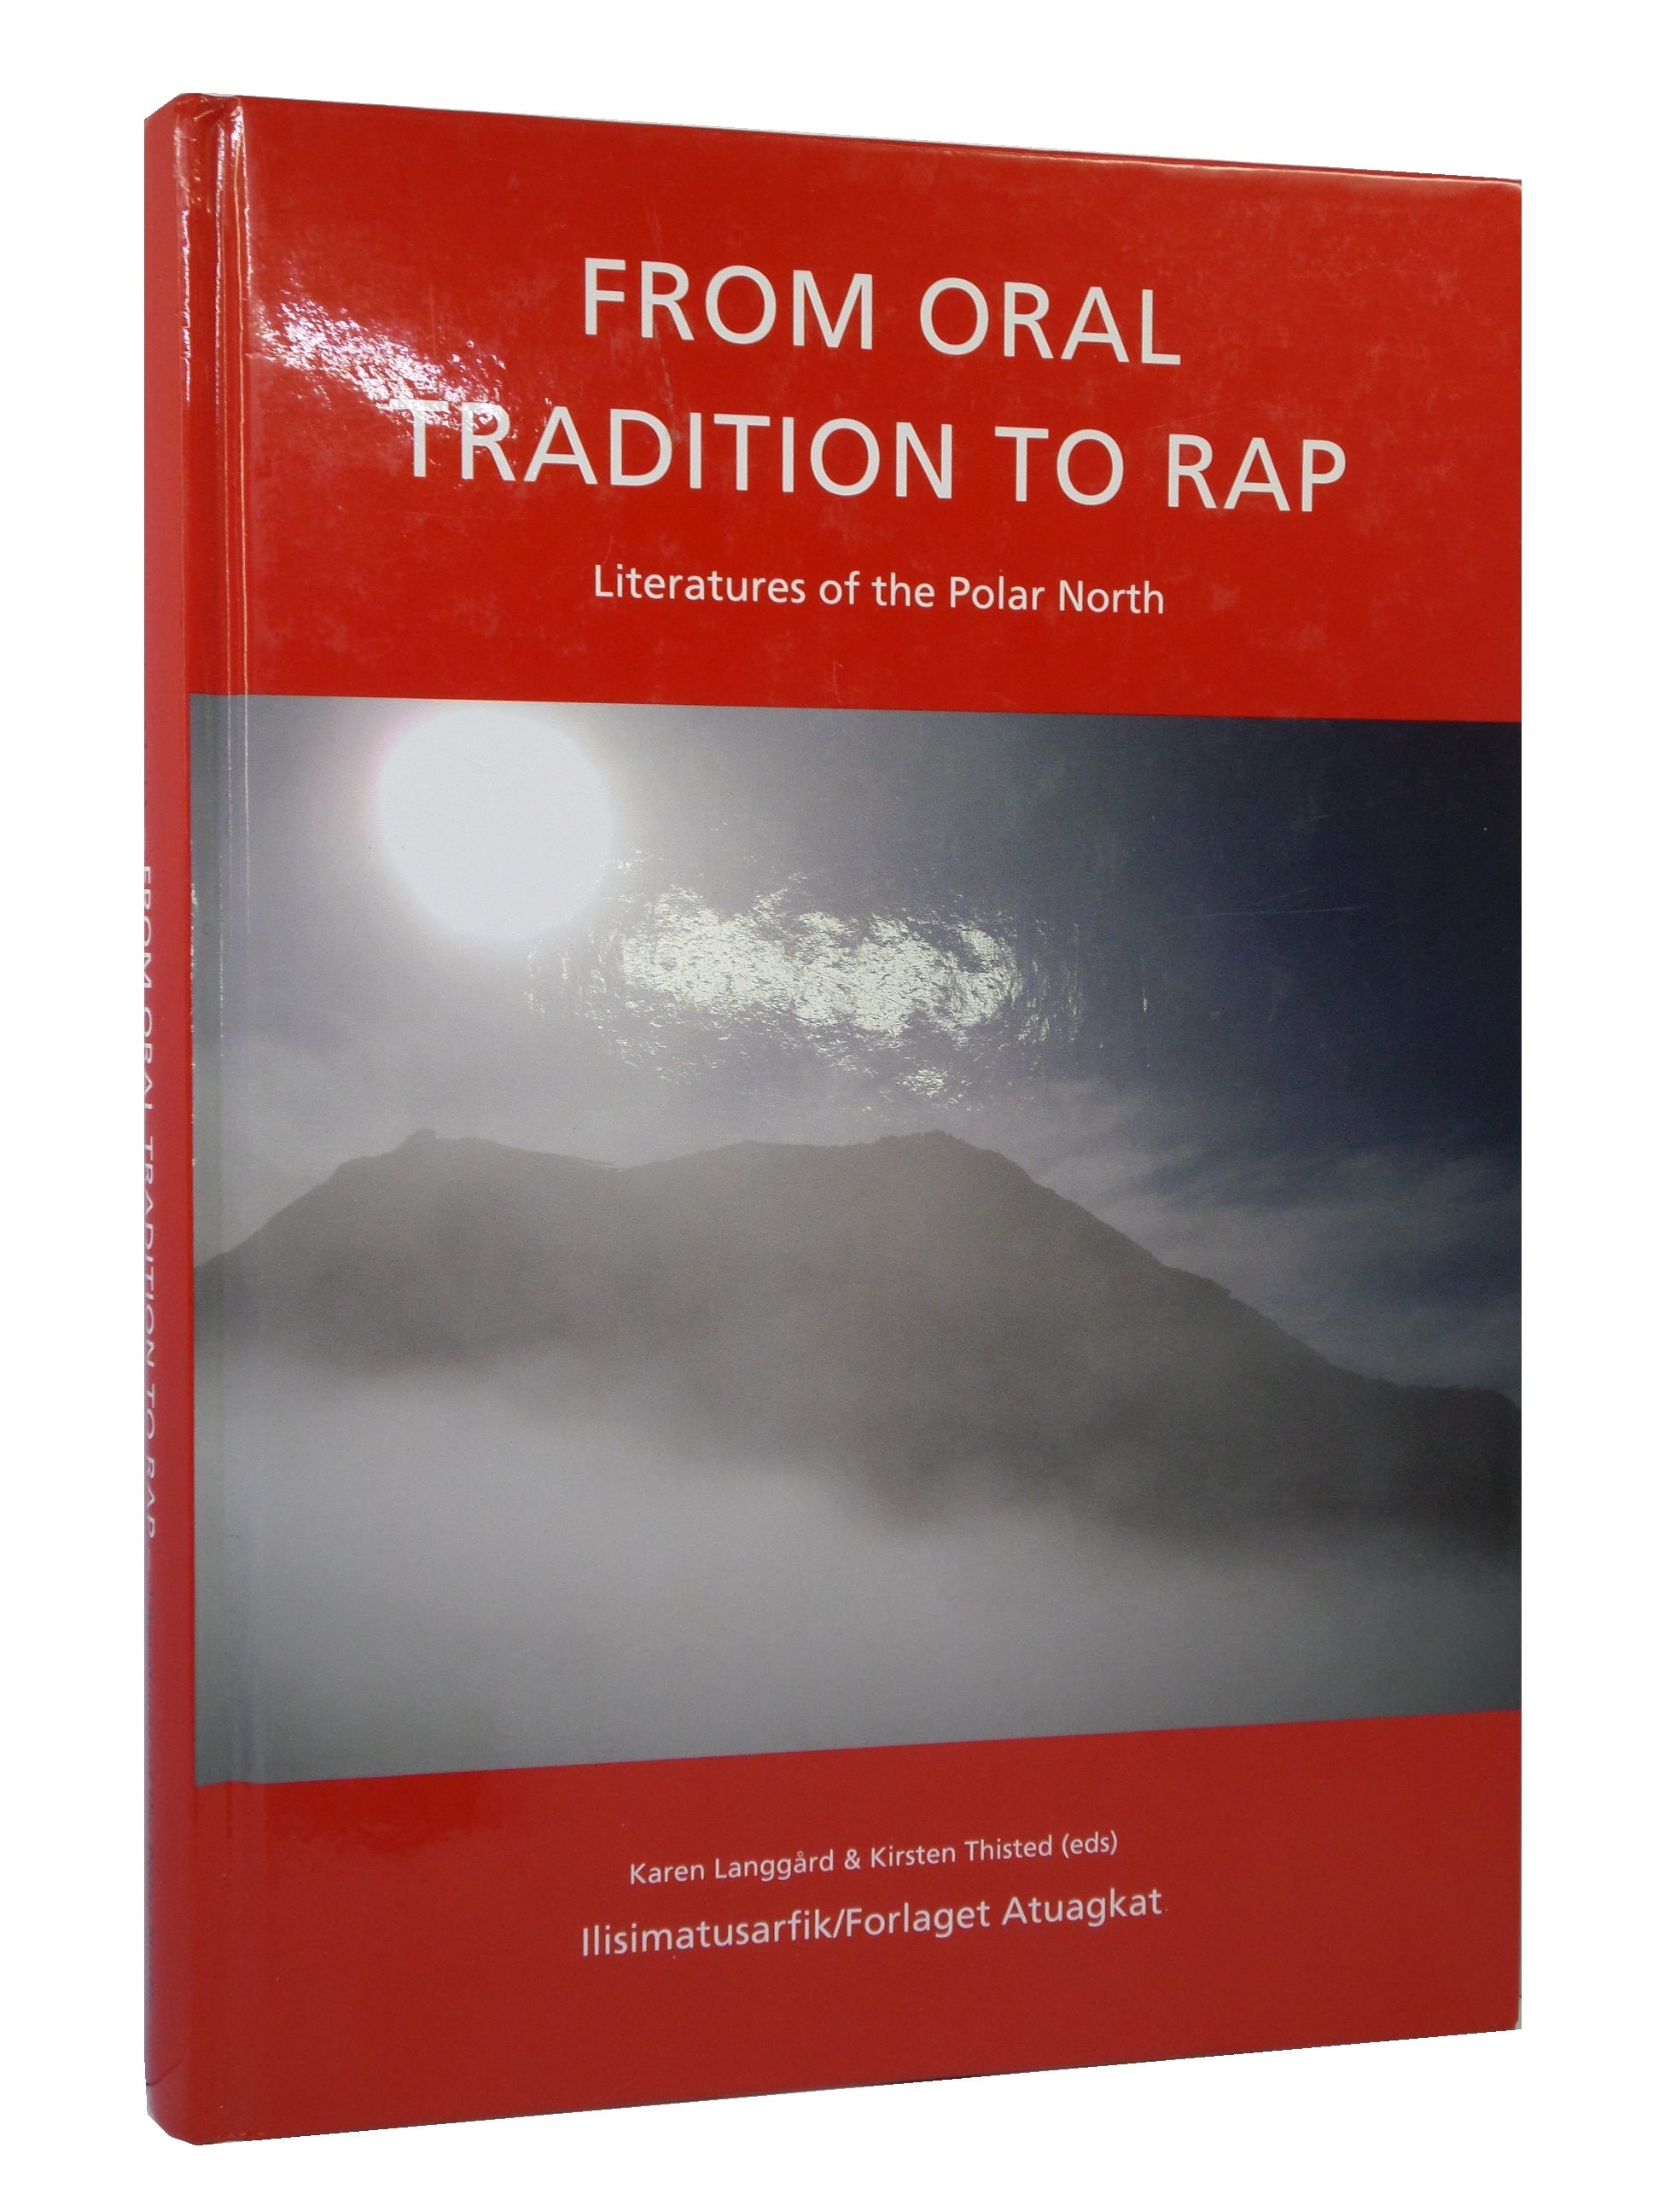 FROM ORAL TRADITION TO RAP: LITERATURES OF THE POLAR NORTH 2011 HARDCOVER